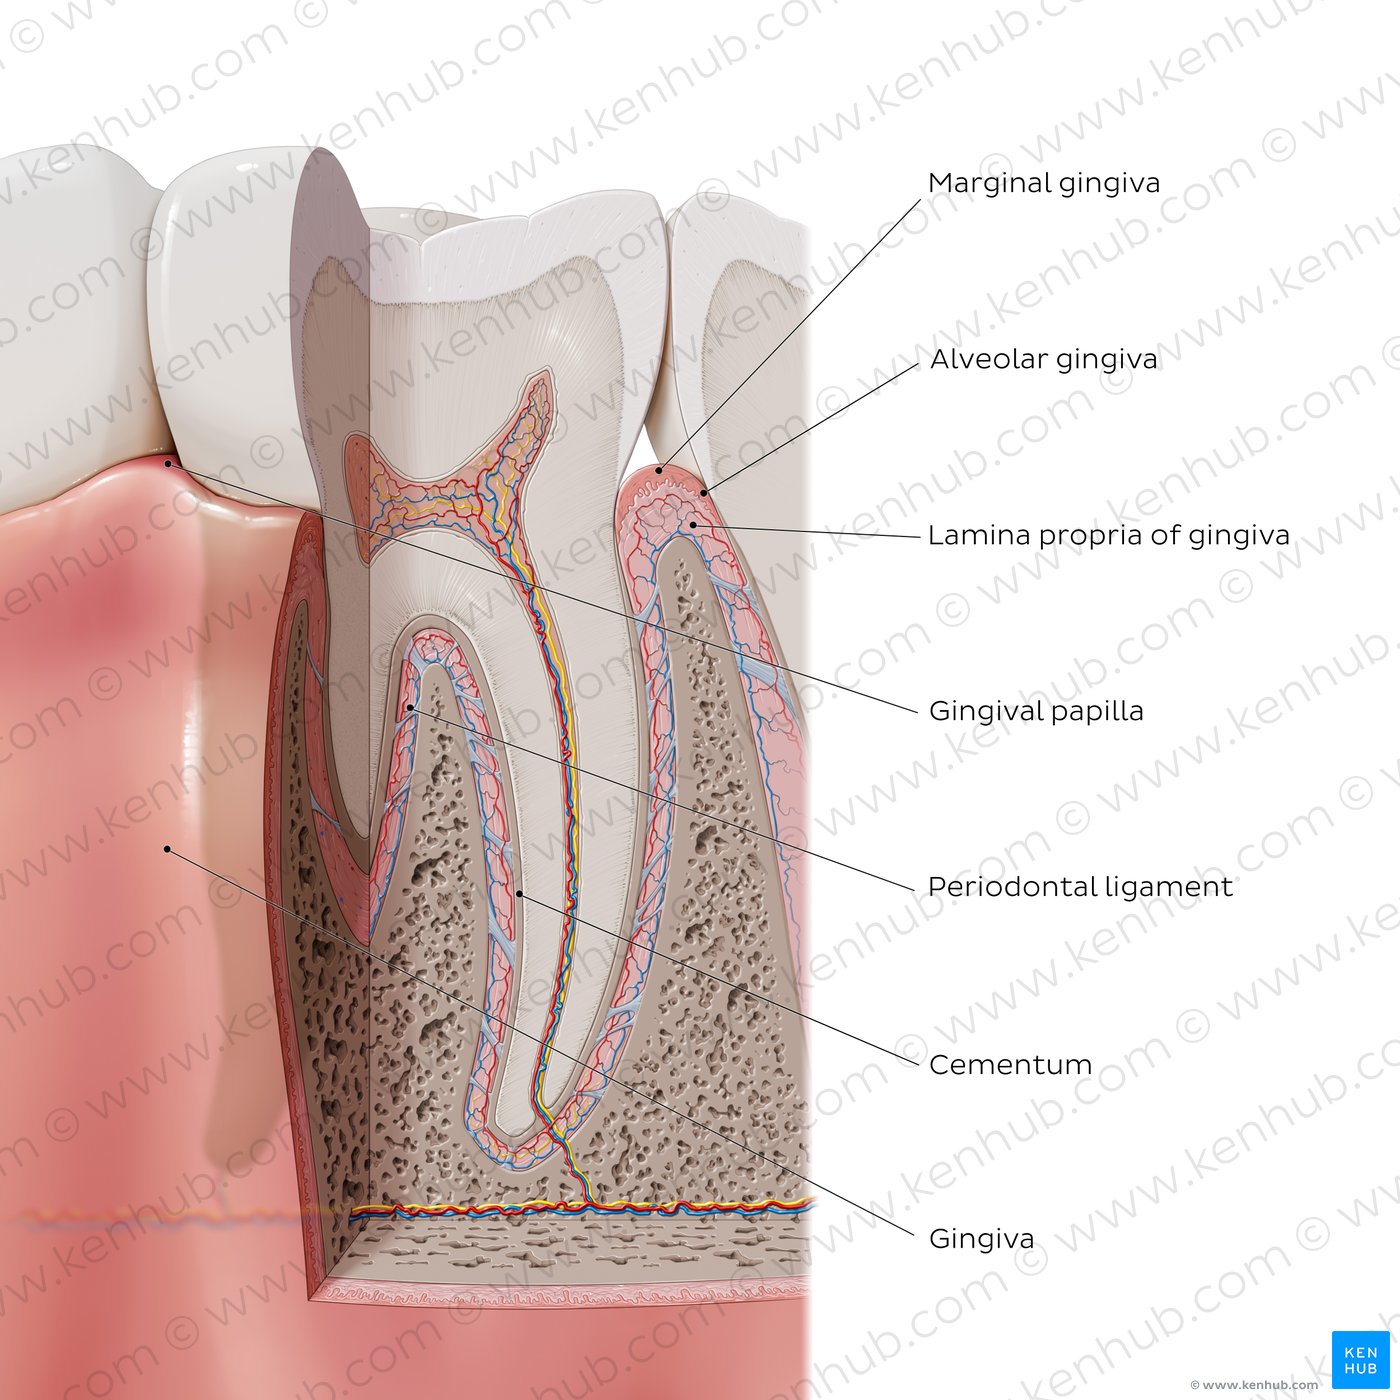 Tooth: supporting structures